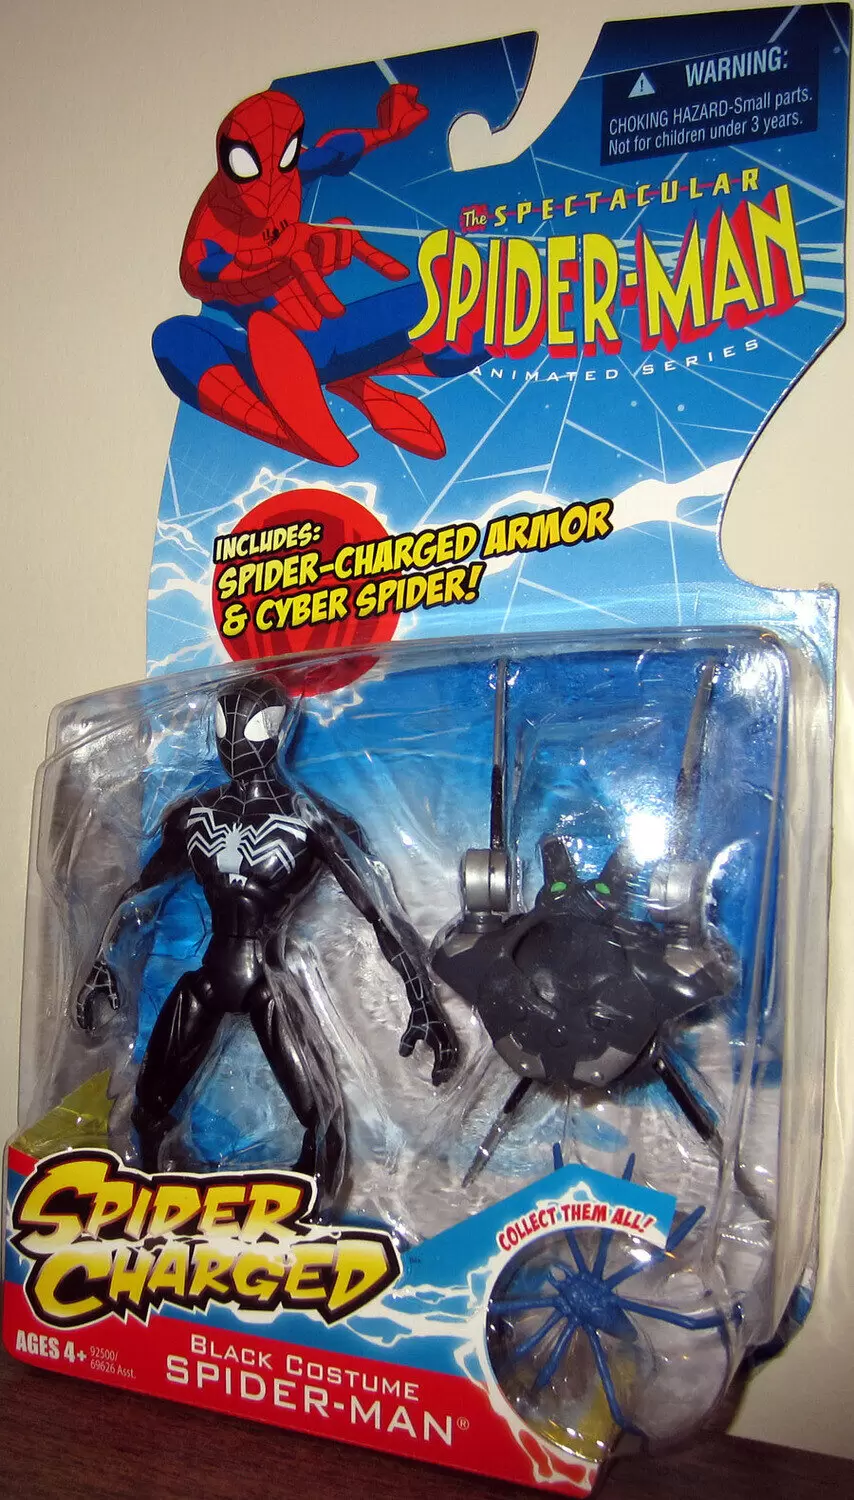 The Spectacular Spider-Man - Black Costume Spider-Man Spider Charged